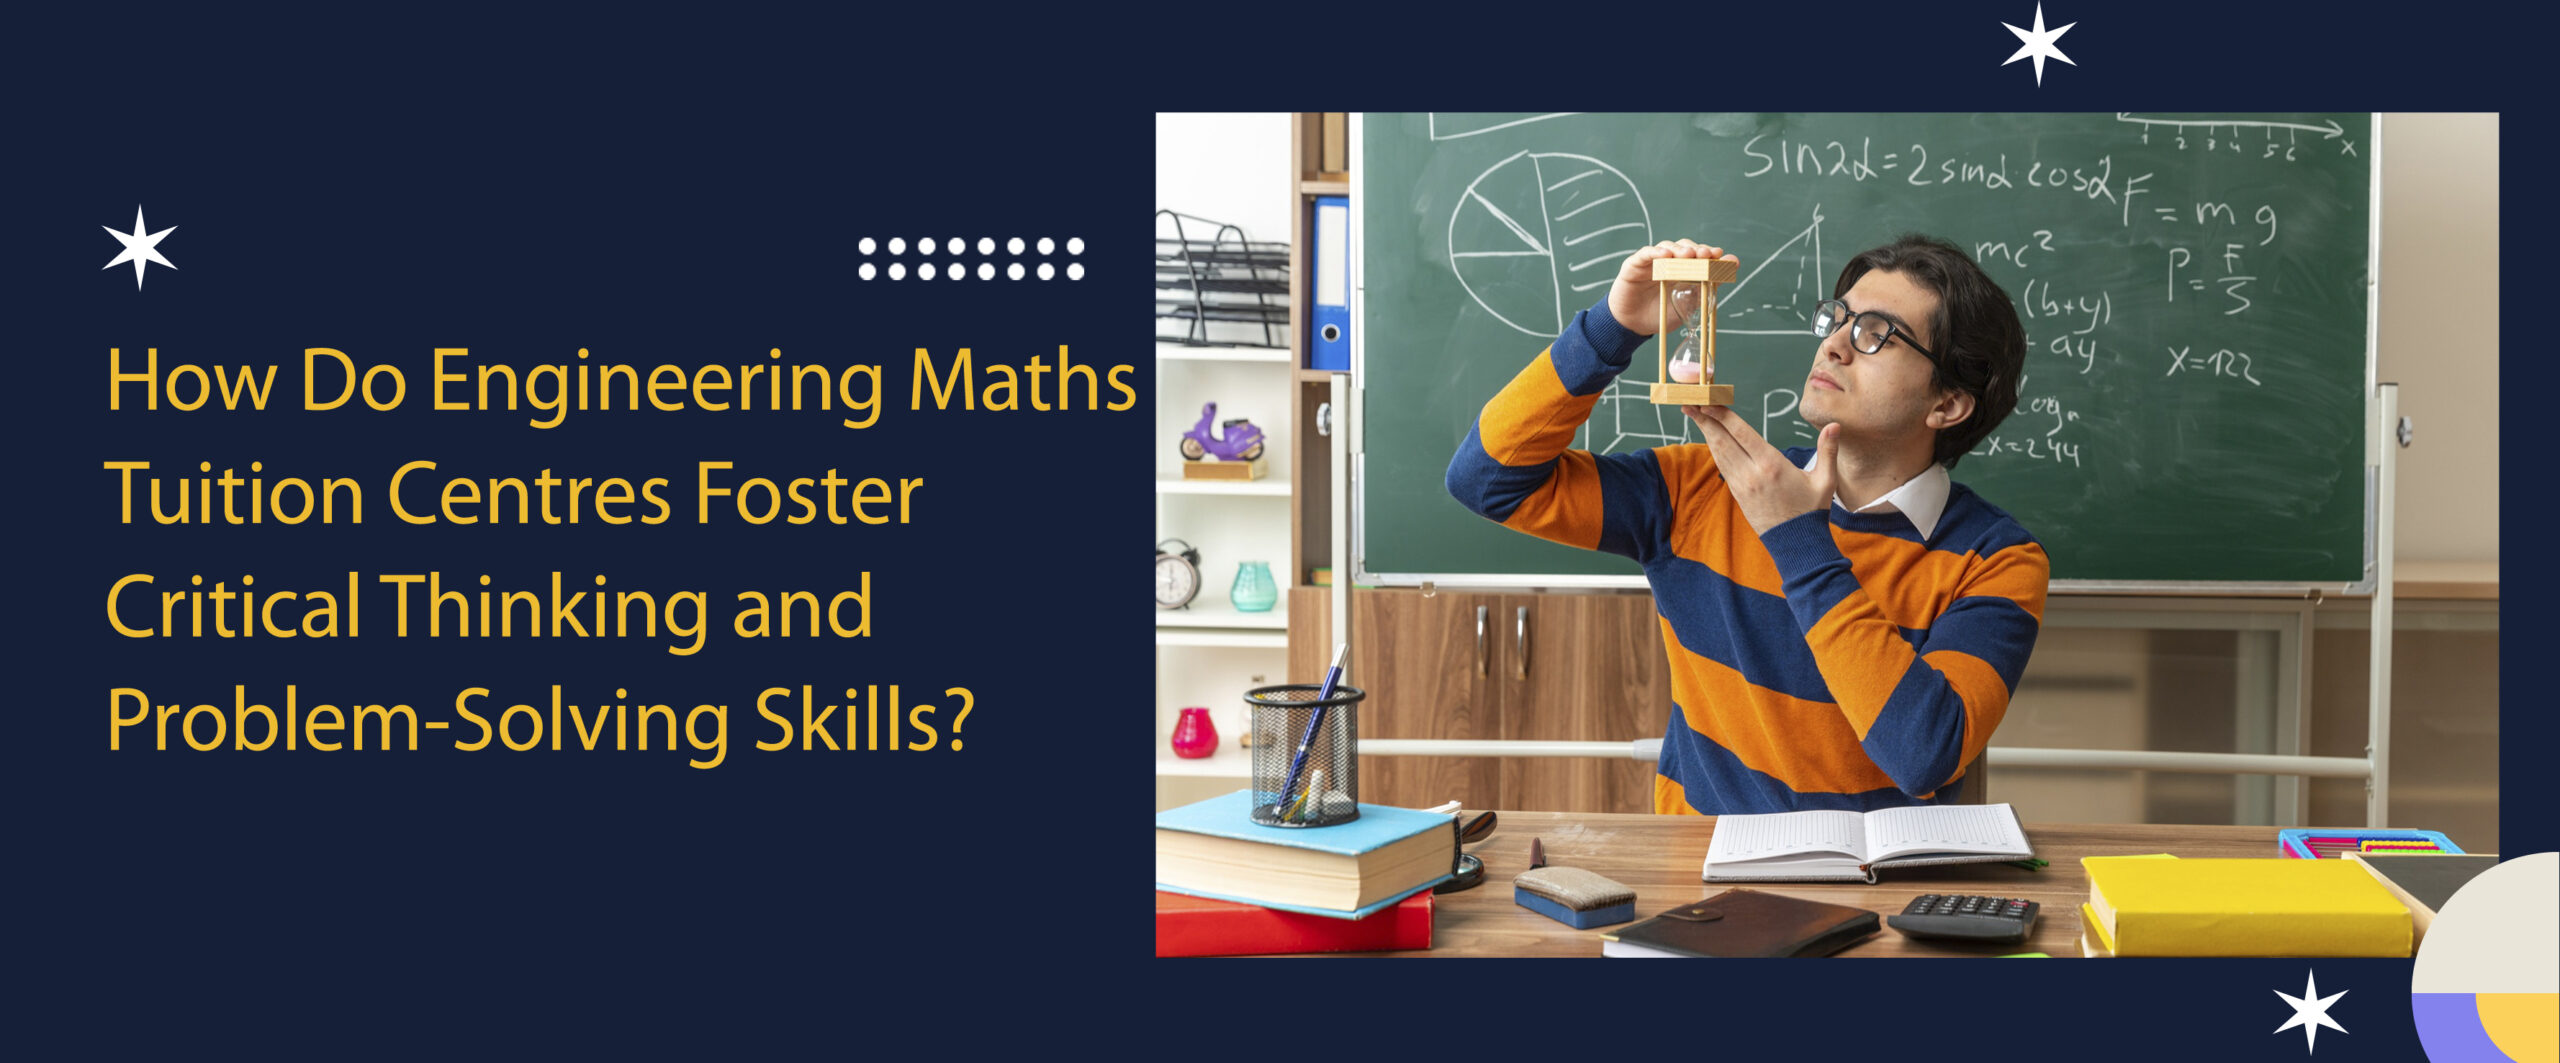 How Do Engineering Maths Tuition Centres Foster Critical Thinking and Problem-Solving Skills